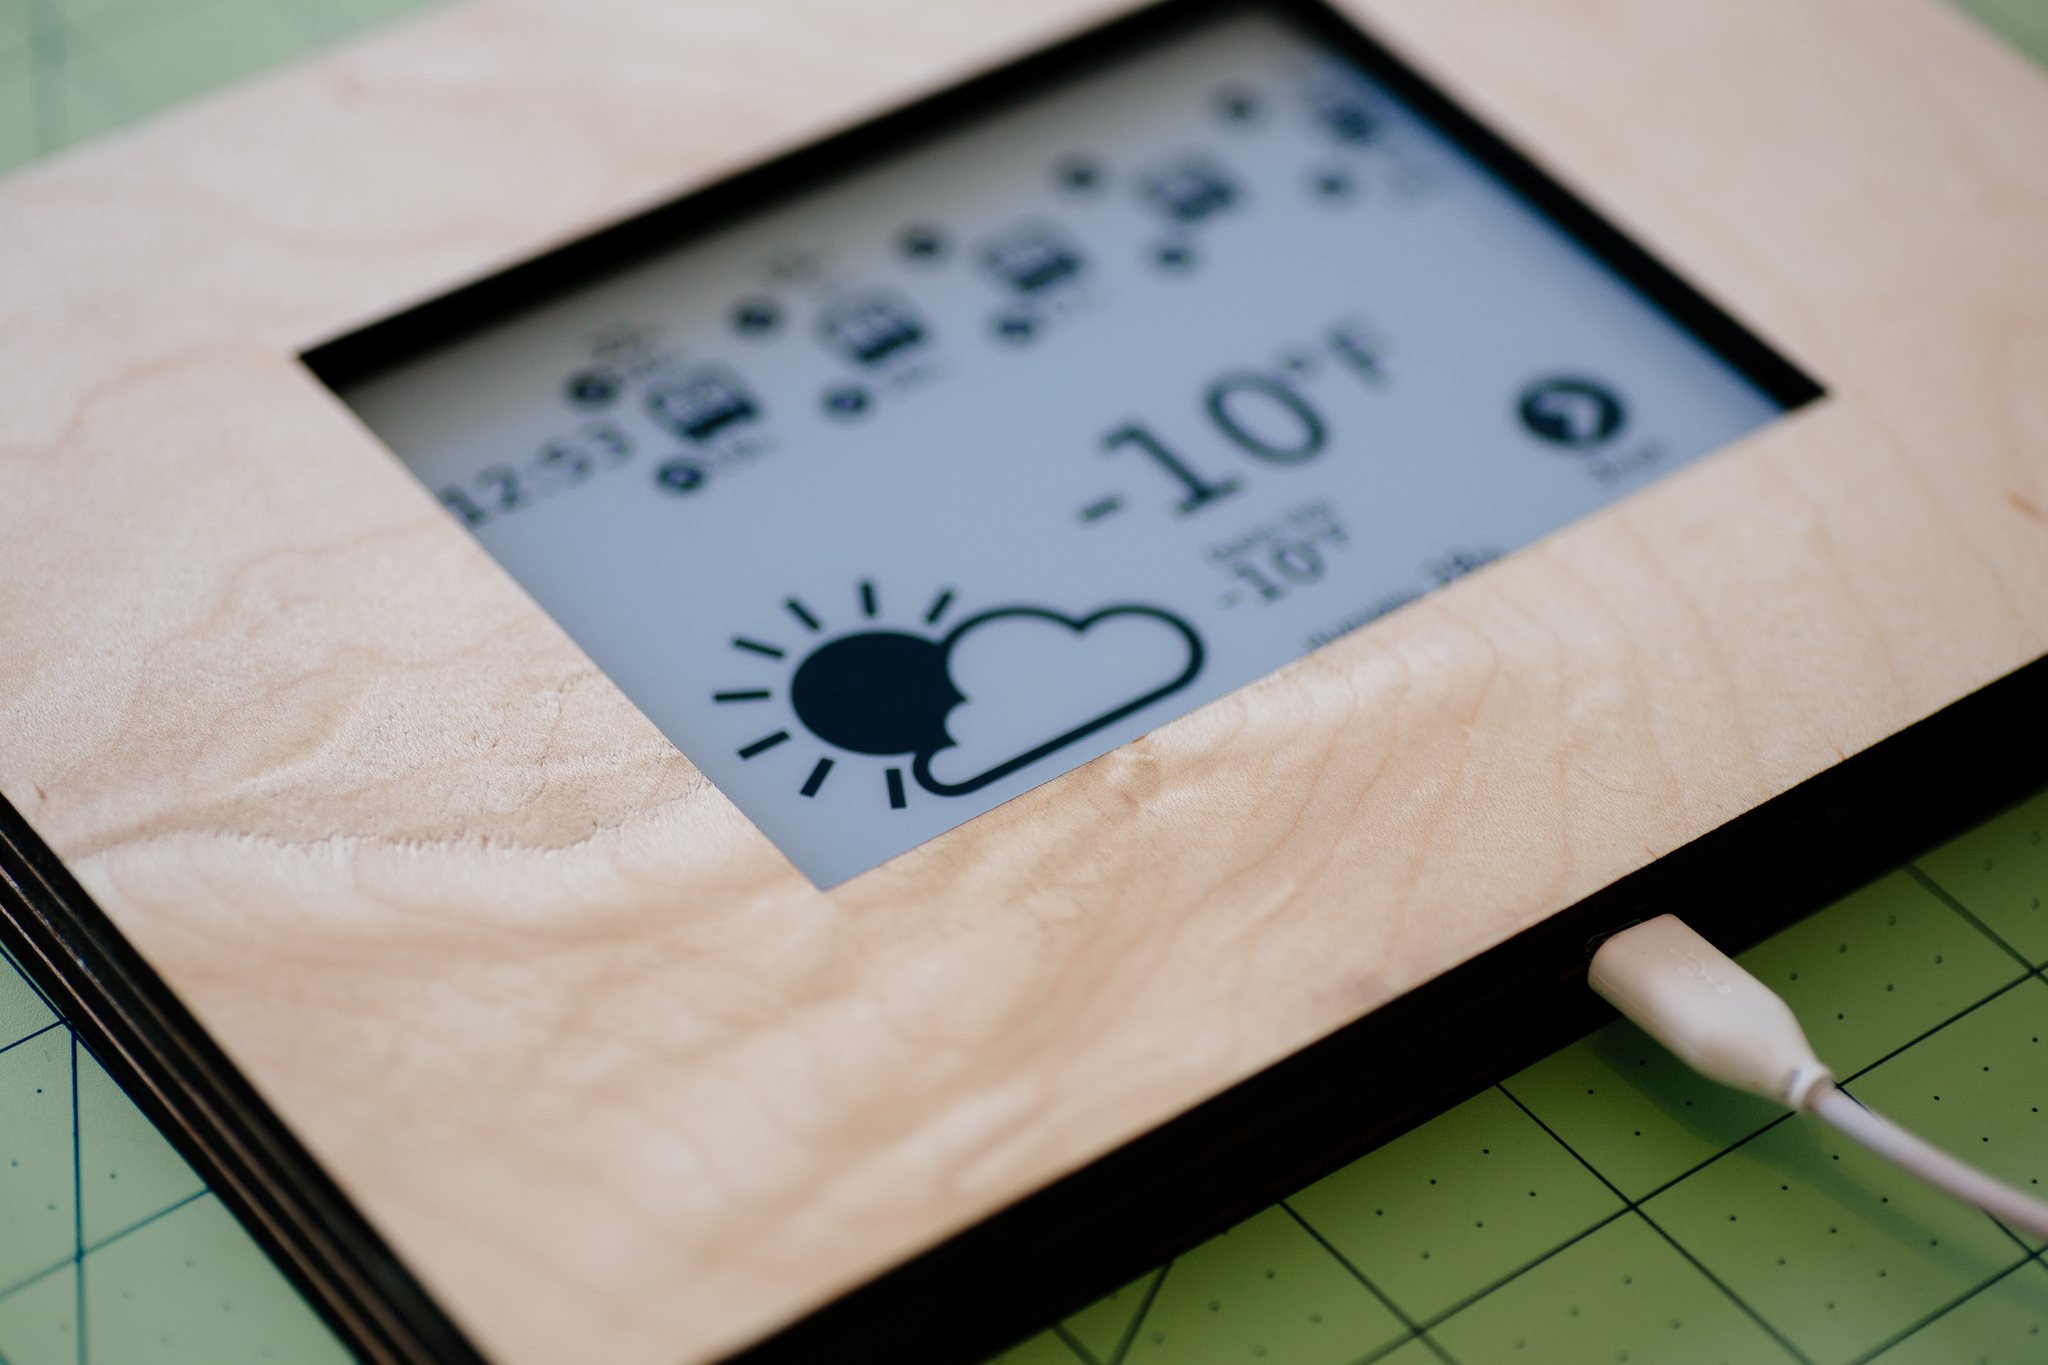 Image of the kindle weather and arrival times display, in a wood frame.